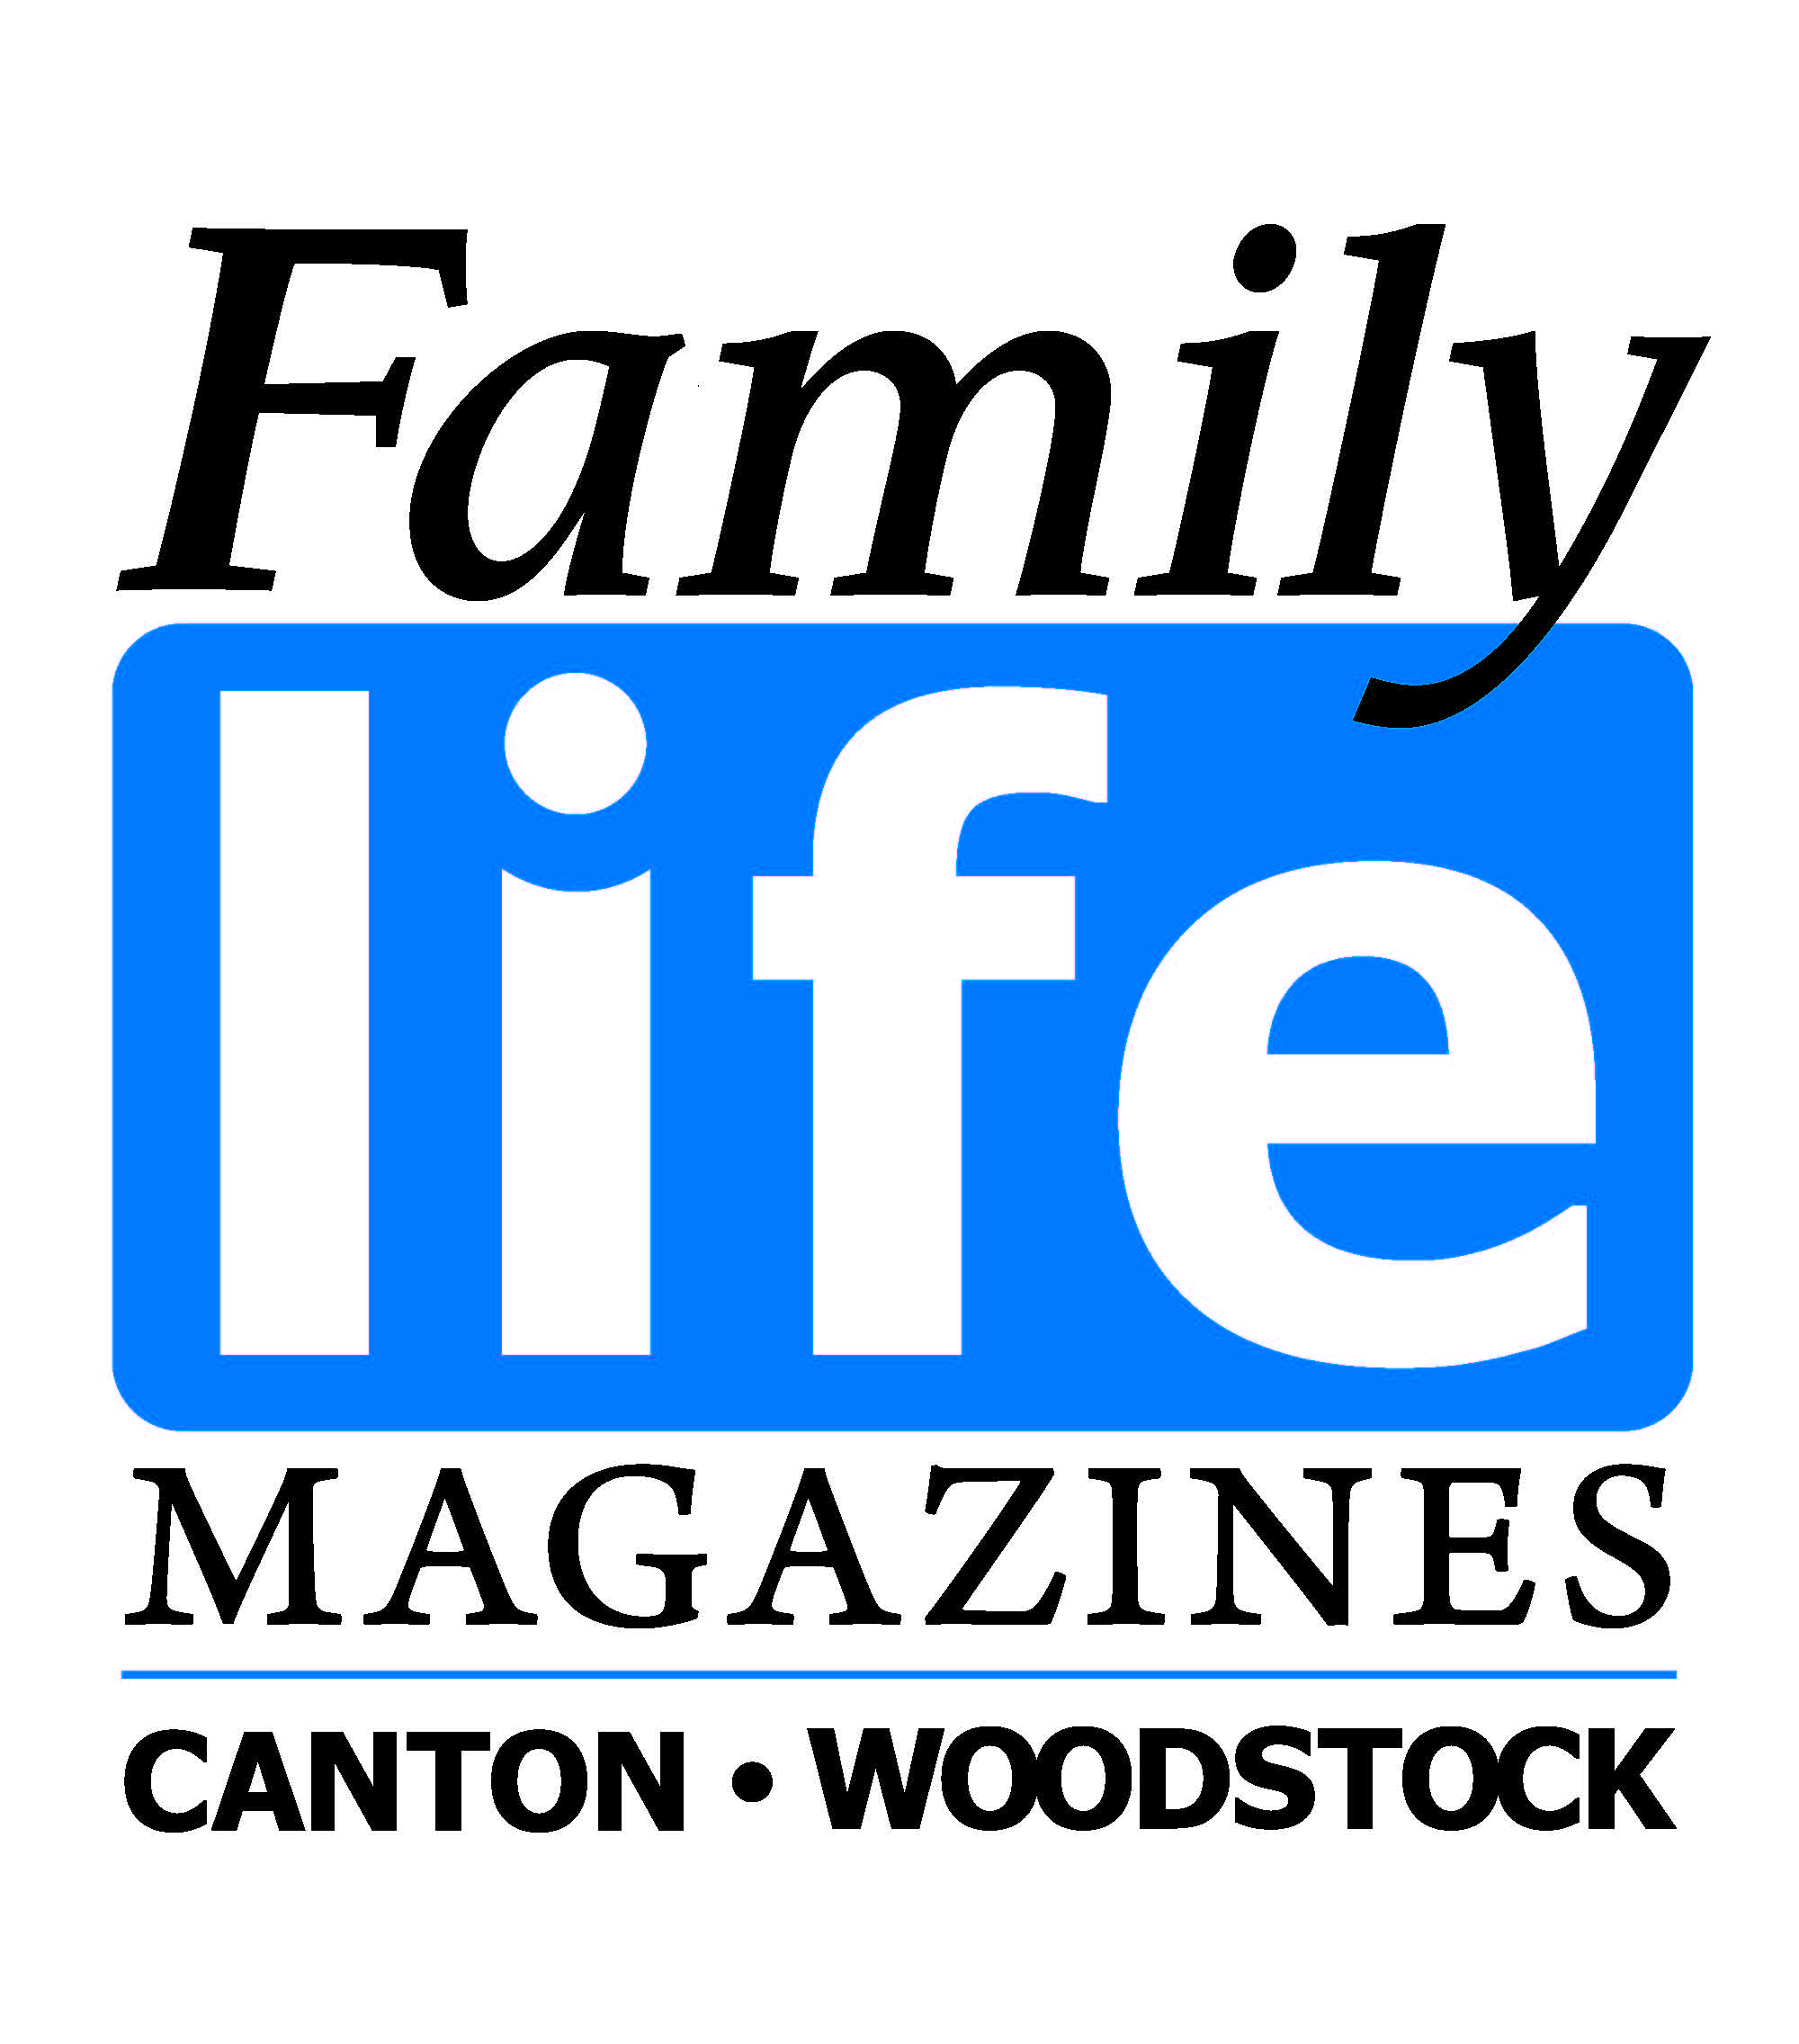 Family Life Publications